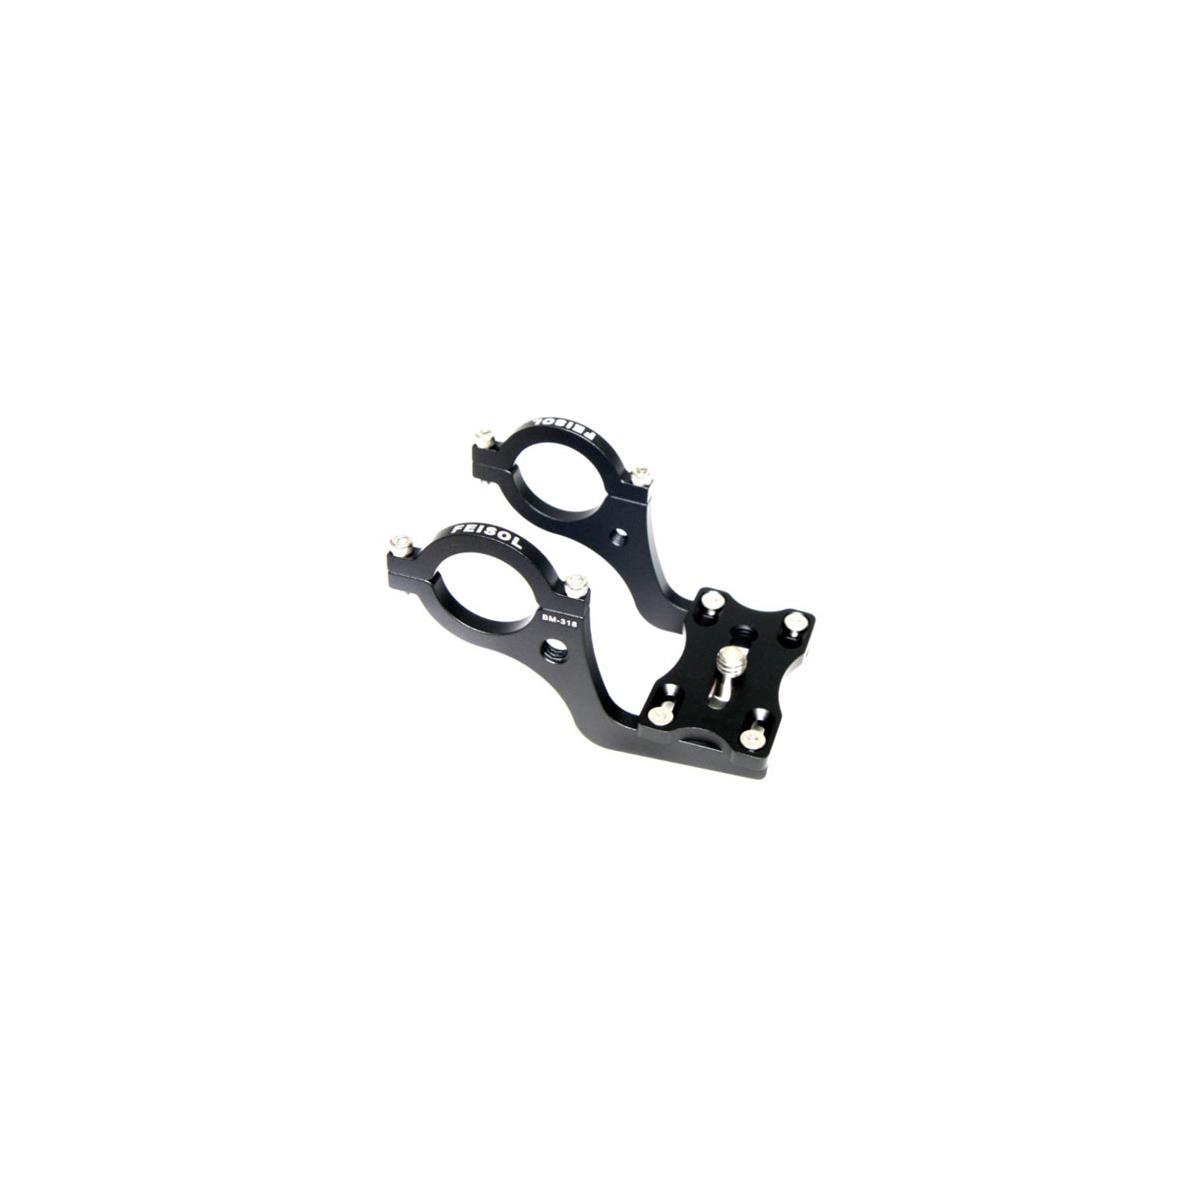 Image of Feisol BM-318 Camera Bike Mount for Bicycle Grip with 31.8mm Diameter